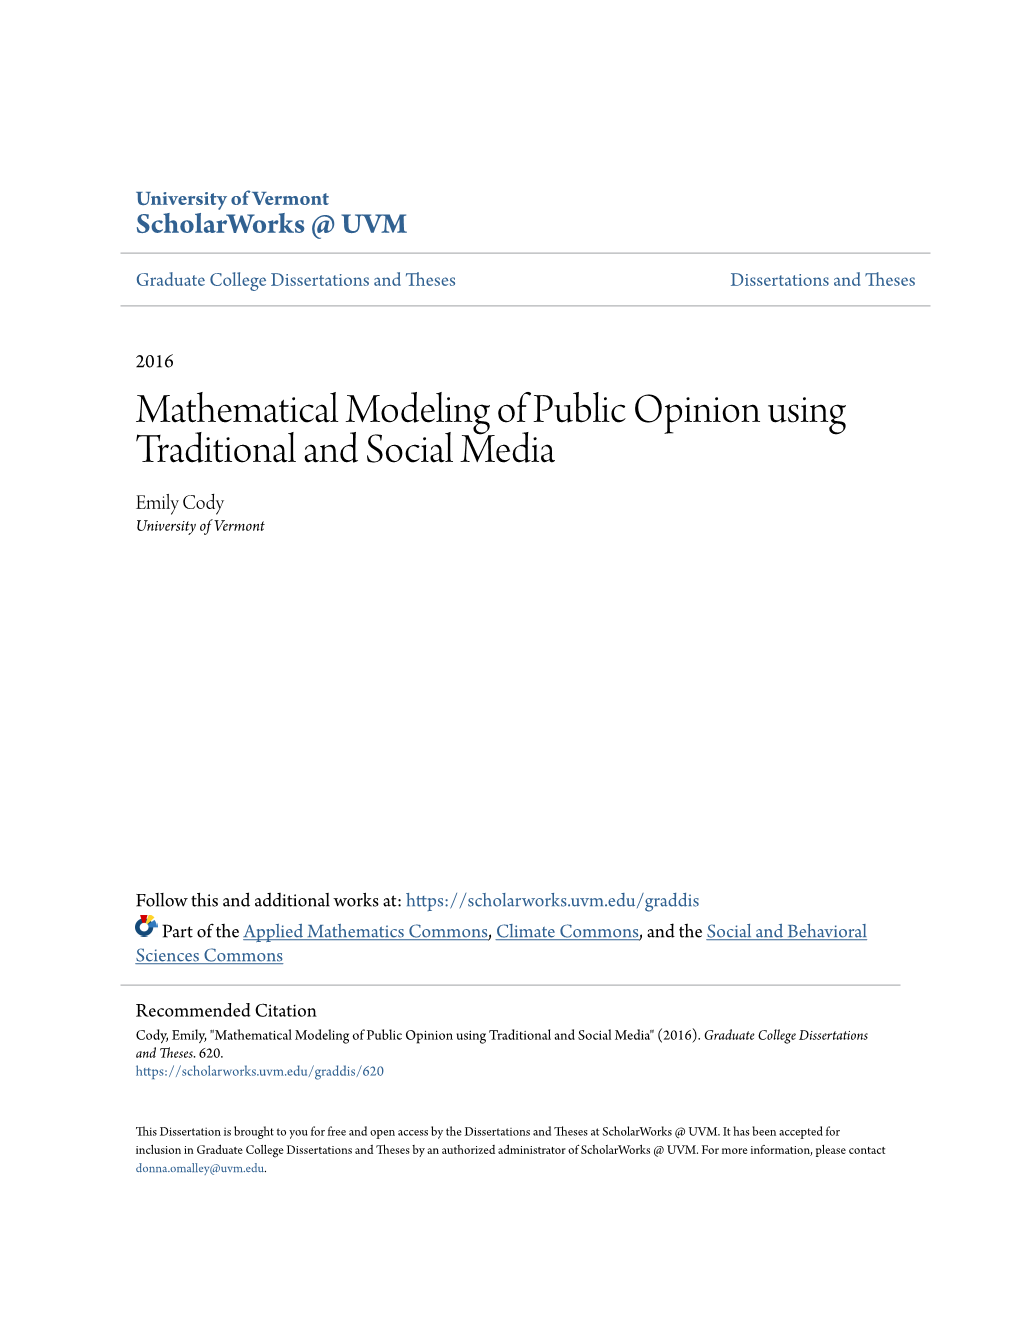 Mathematical Modeling of Public Opinion Using Traditional and Social Media Emily Cody University of Vermont